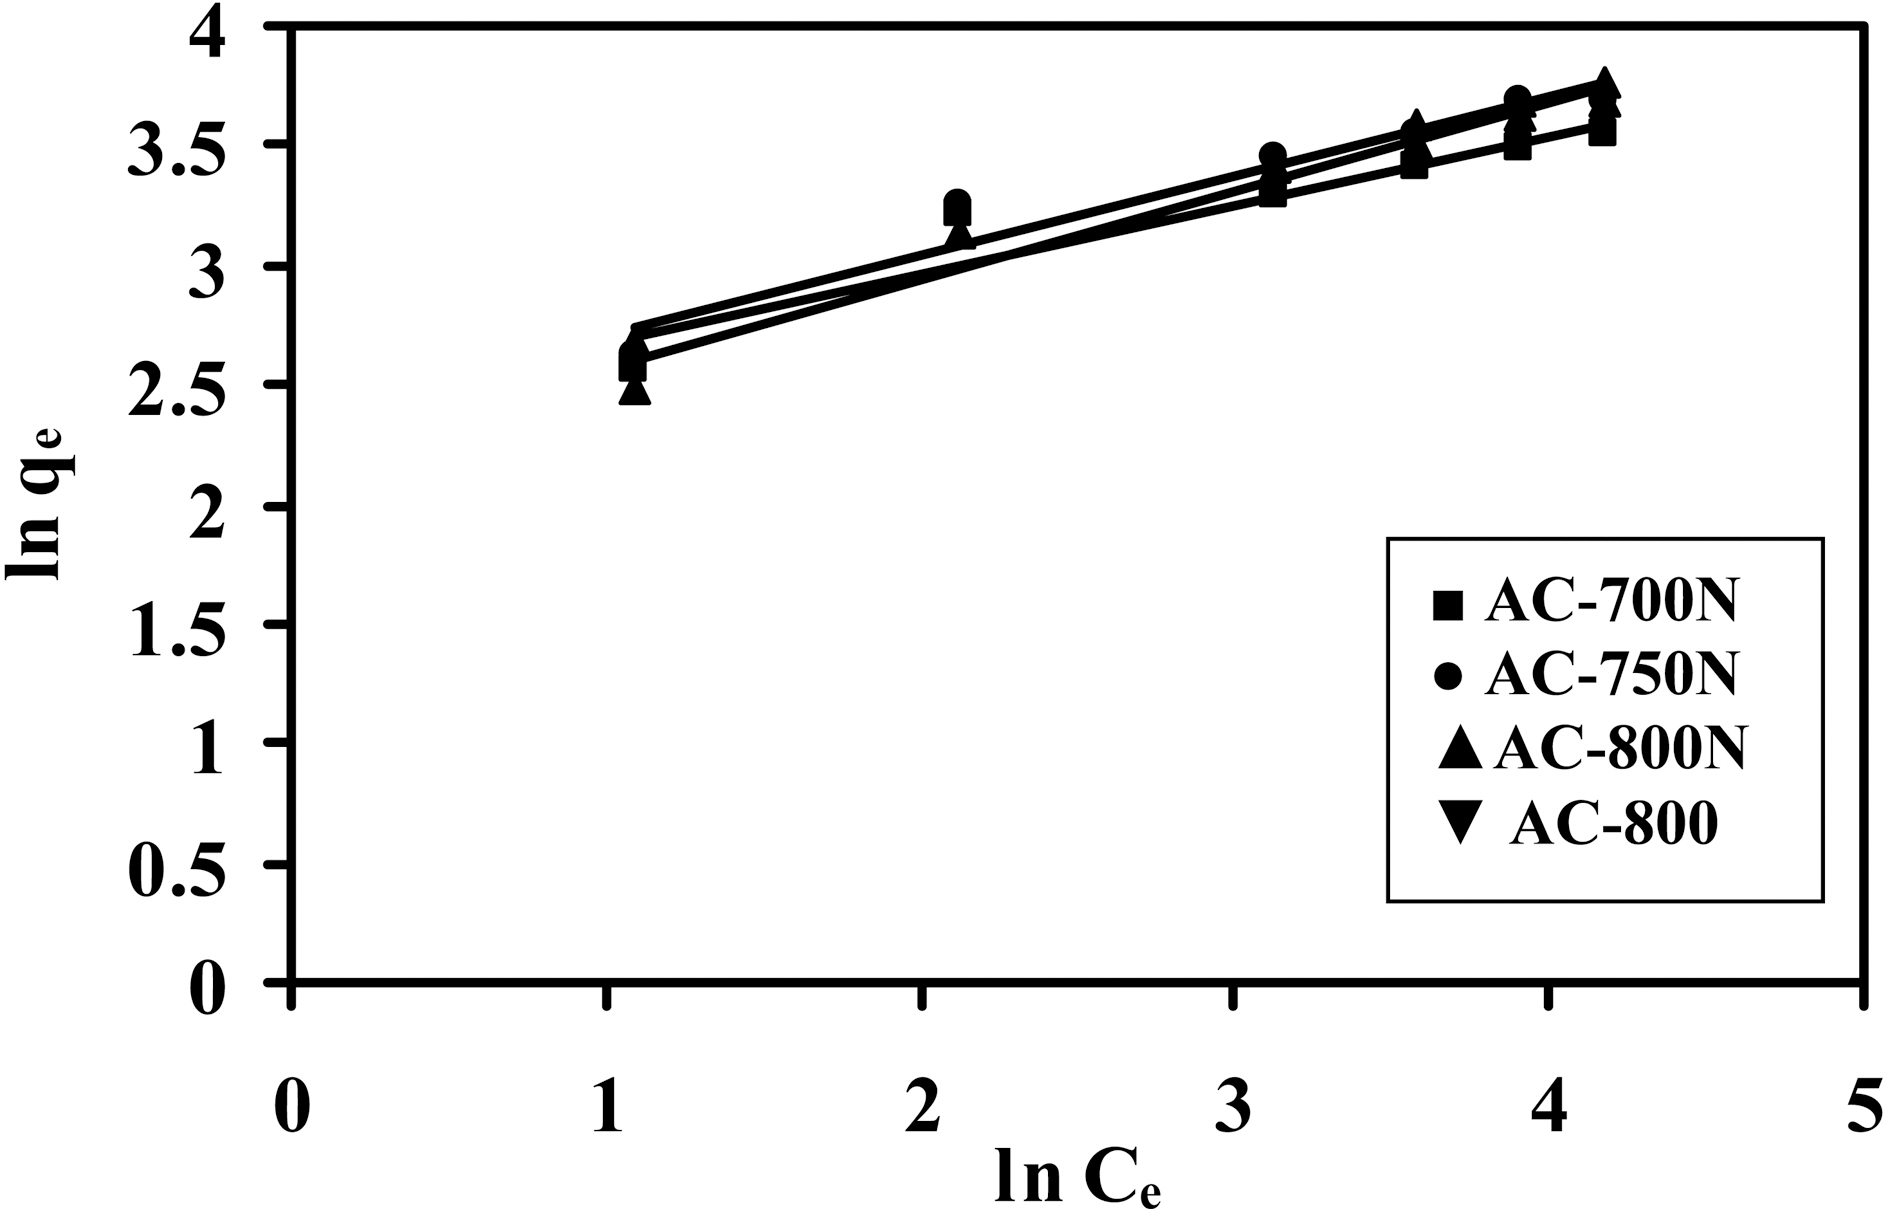 Freundlich plots for adsorption of Pb (II) ions onto theprepared carbons.